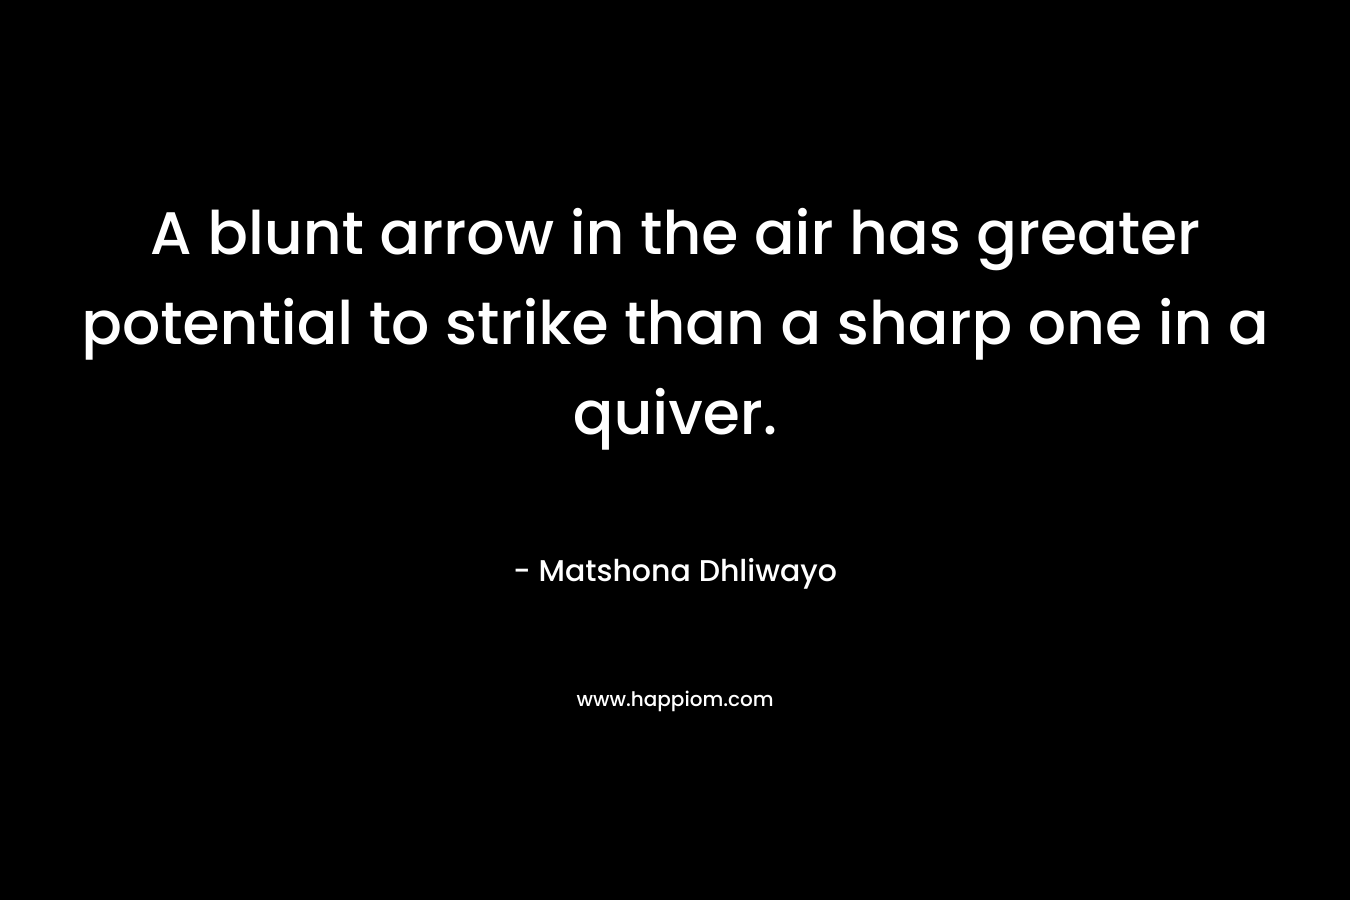 A blunt arrow in the air has greater potential to strike than a sharp one in a quiver. – Matshona Dhliwayo